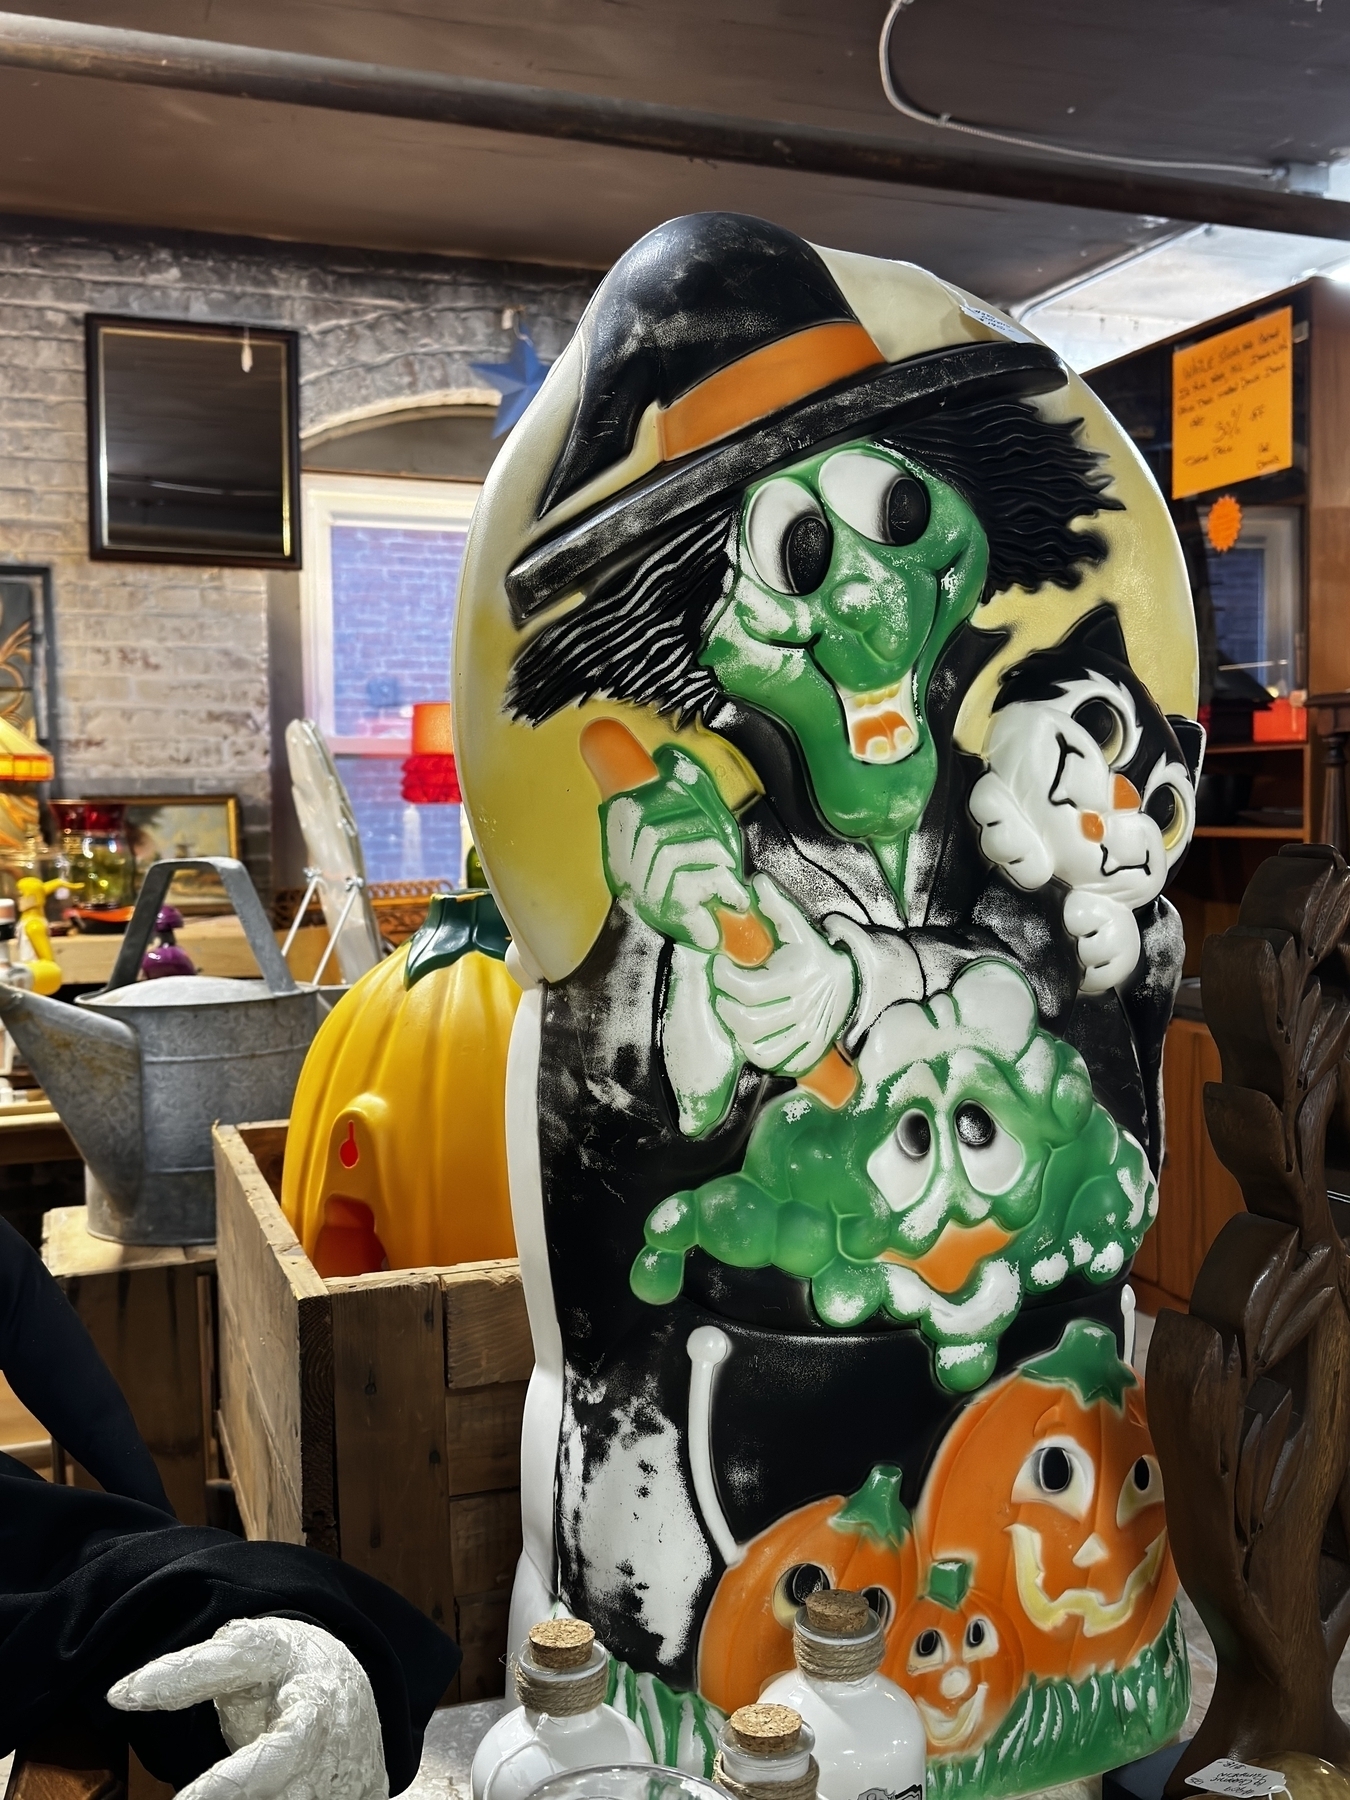 Vintage plastic light-up witch with a green face, a black cat, a bubbling cauldron, and orange jack-o-lanterns at the base